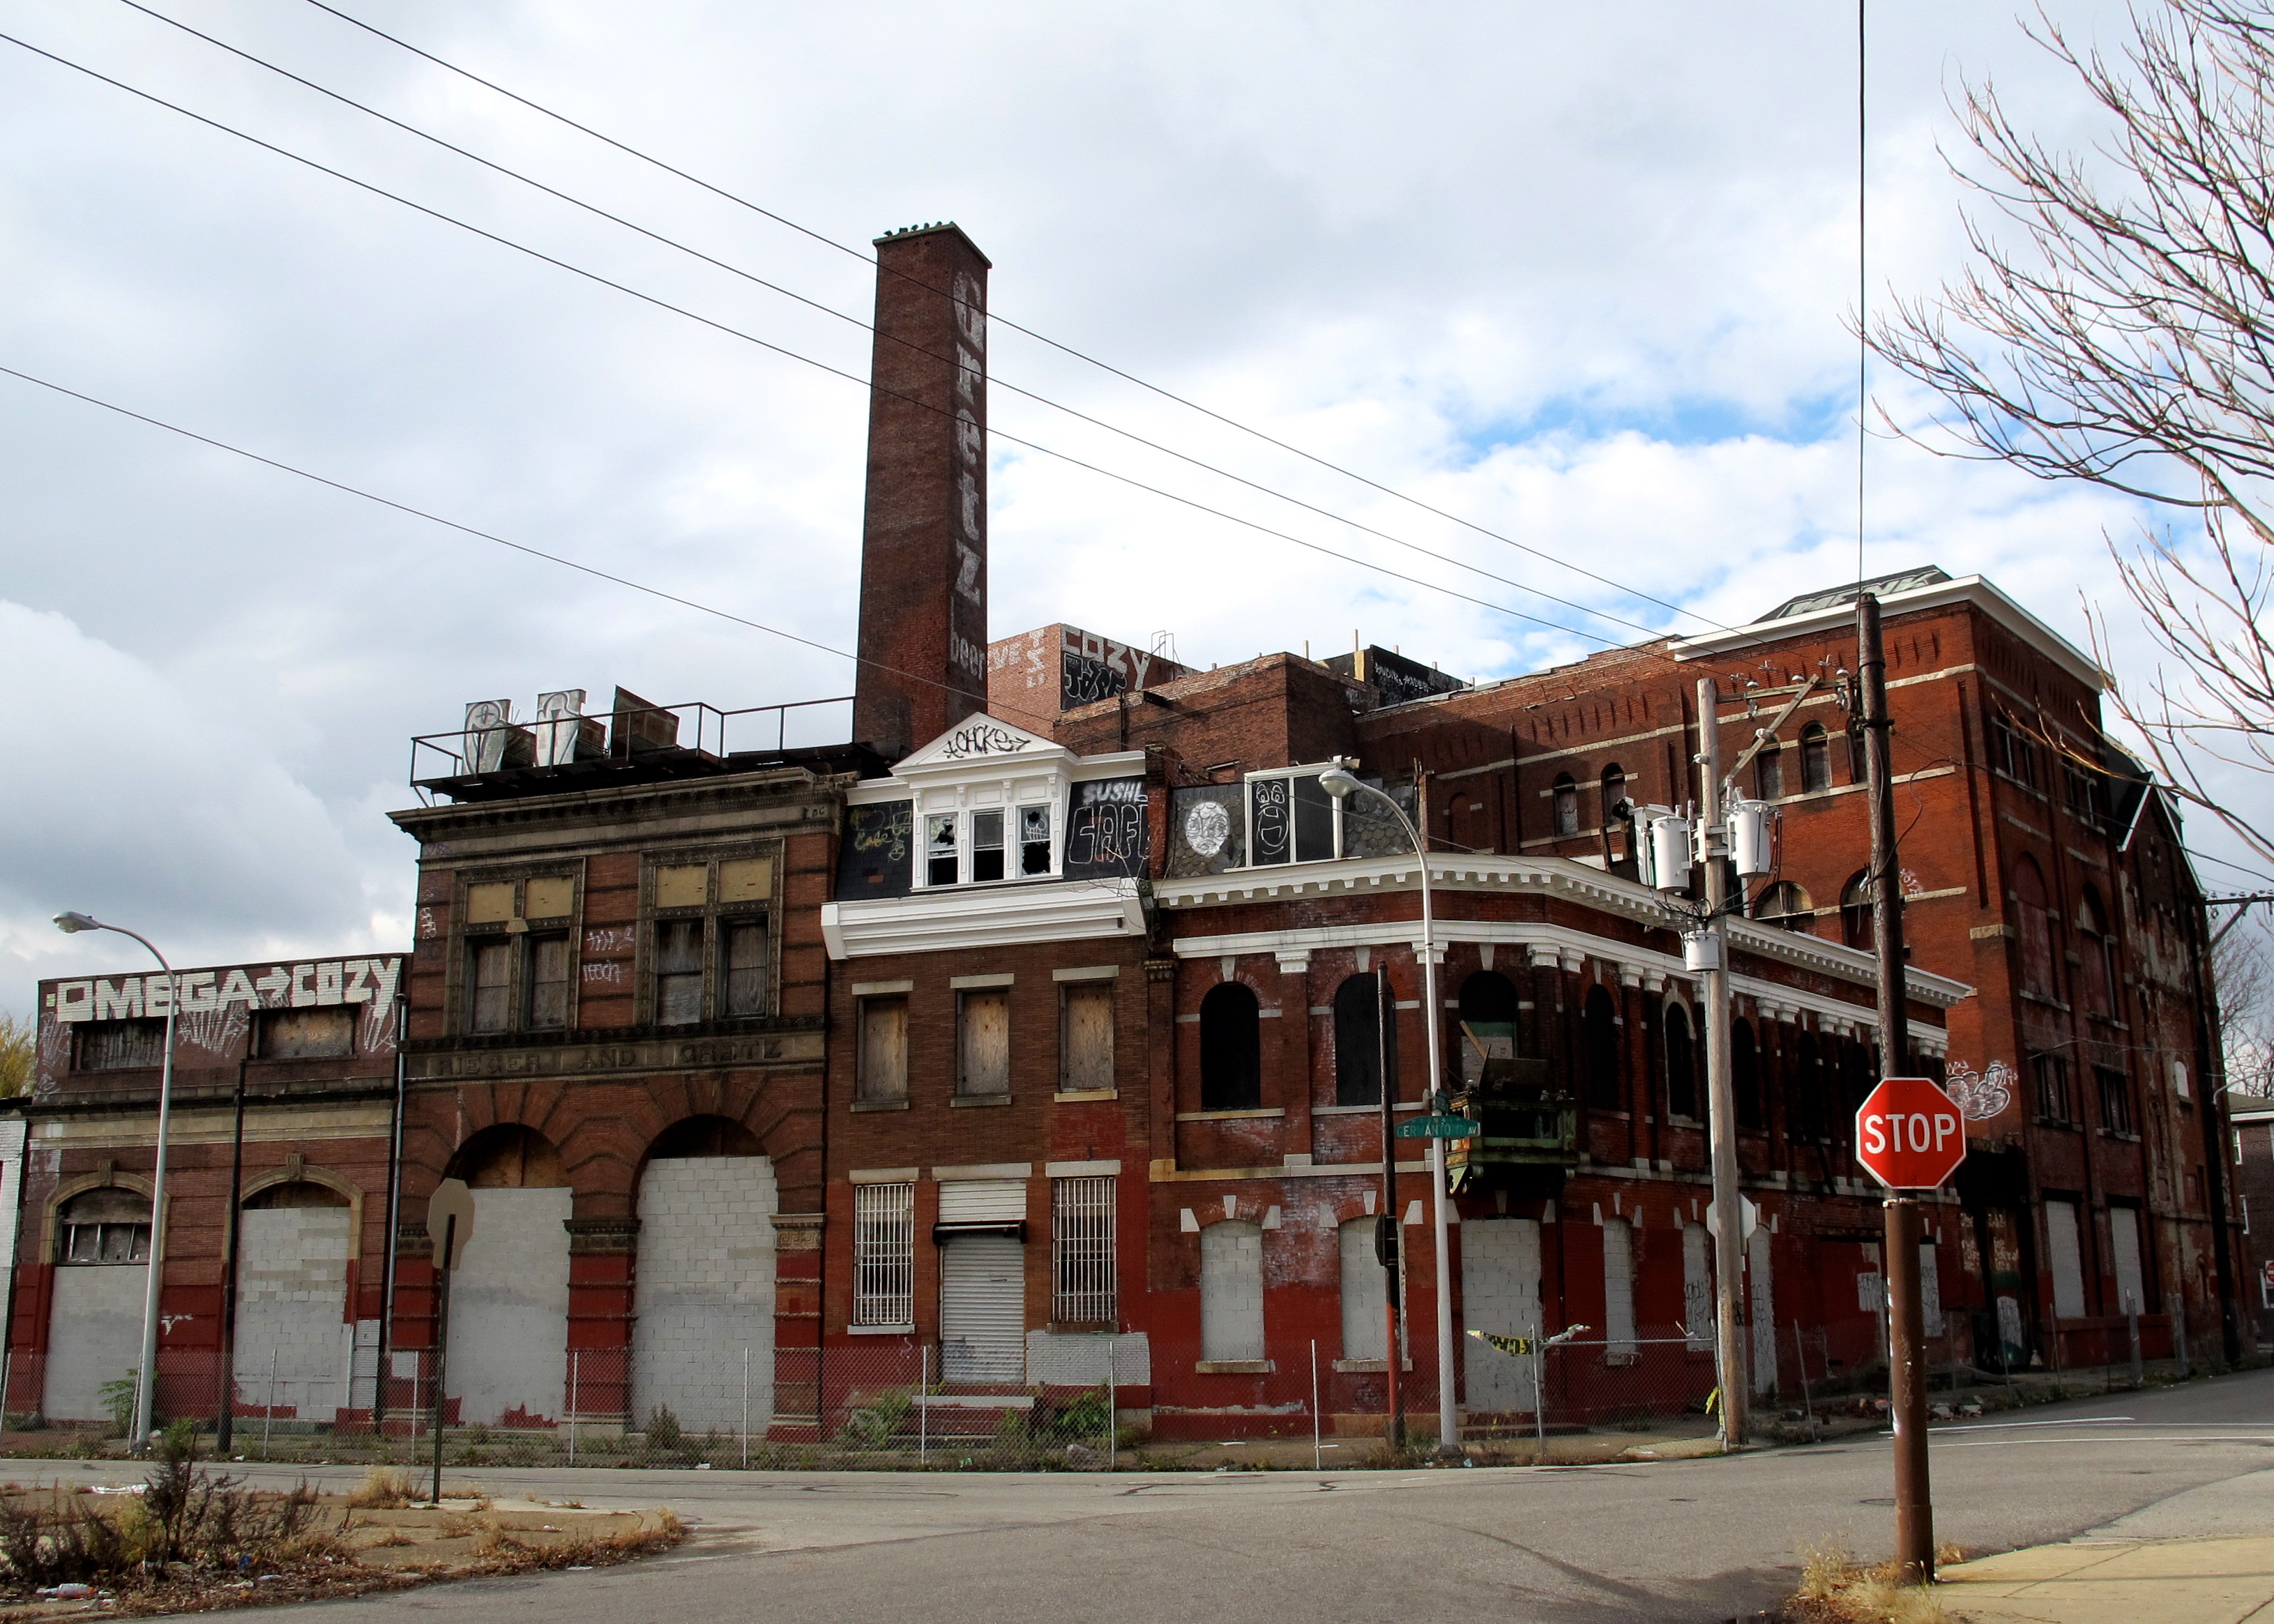 The Gretz Brewery complex in Kensington has been vacant since 1961.